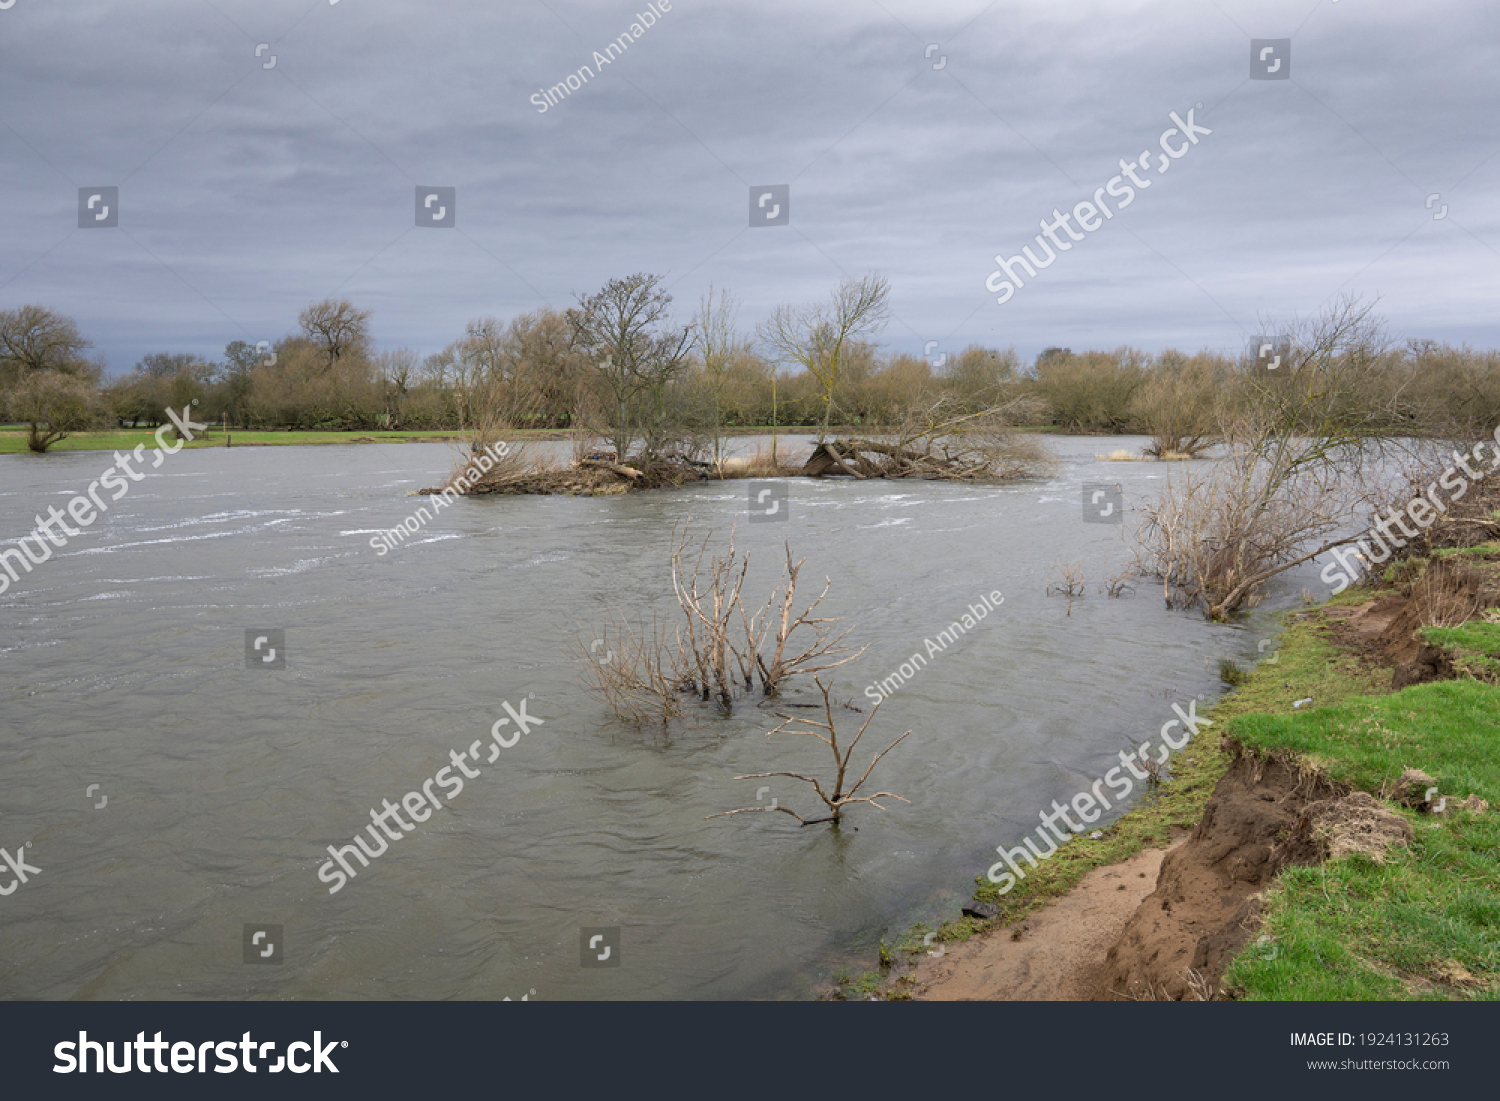 Flooded river with overcast sky #1924131263